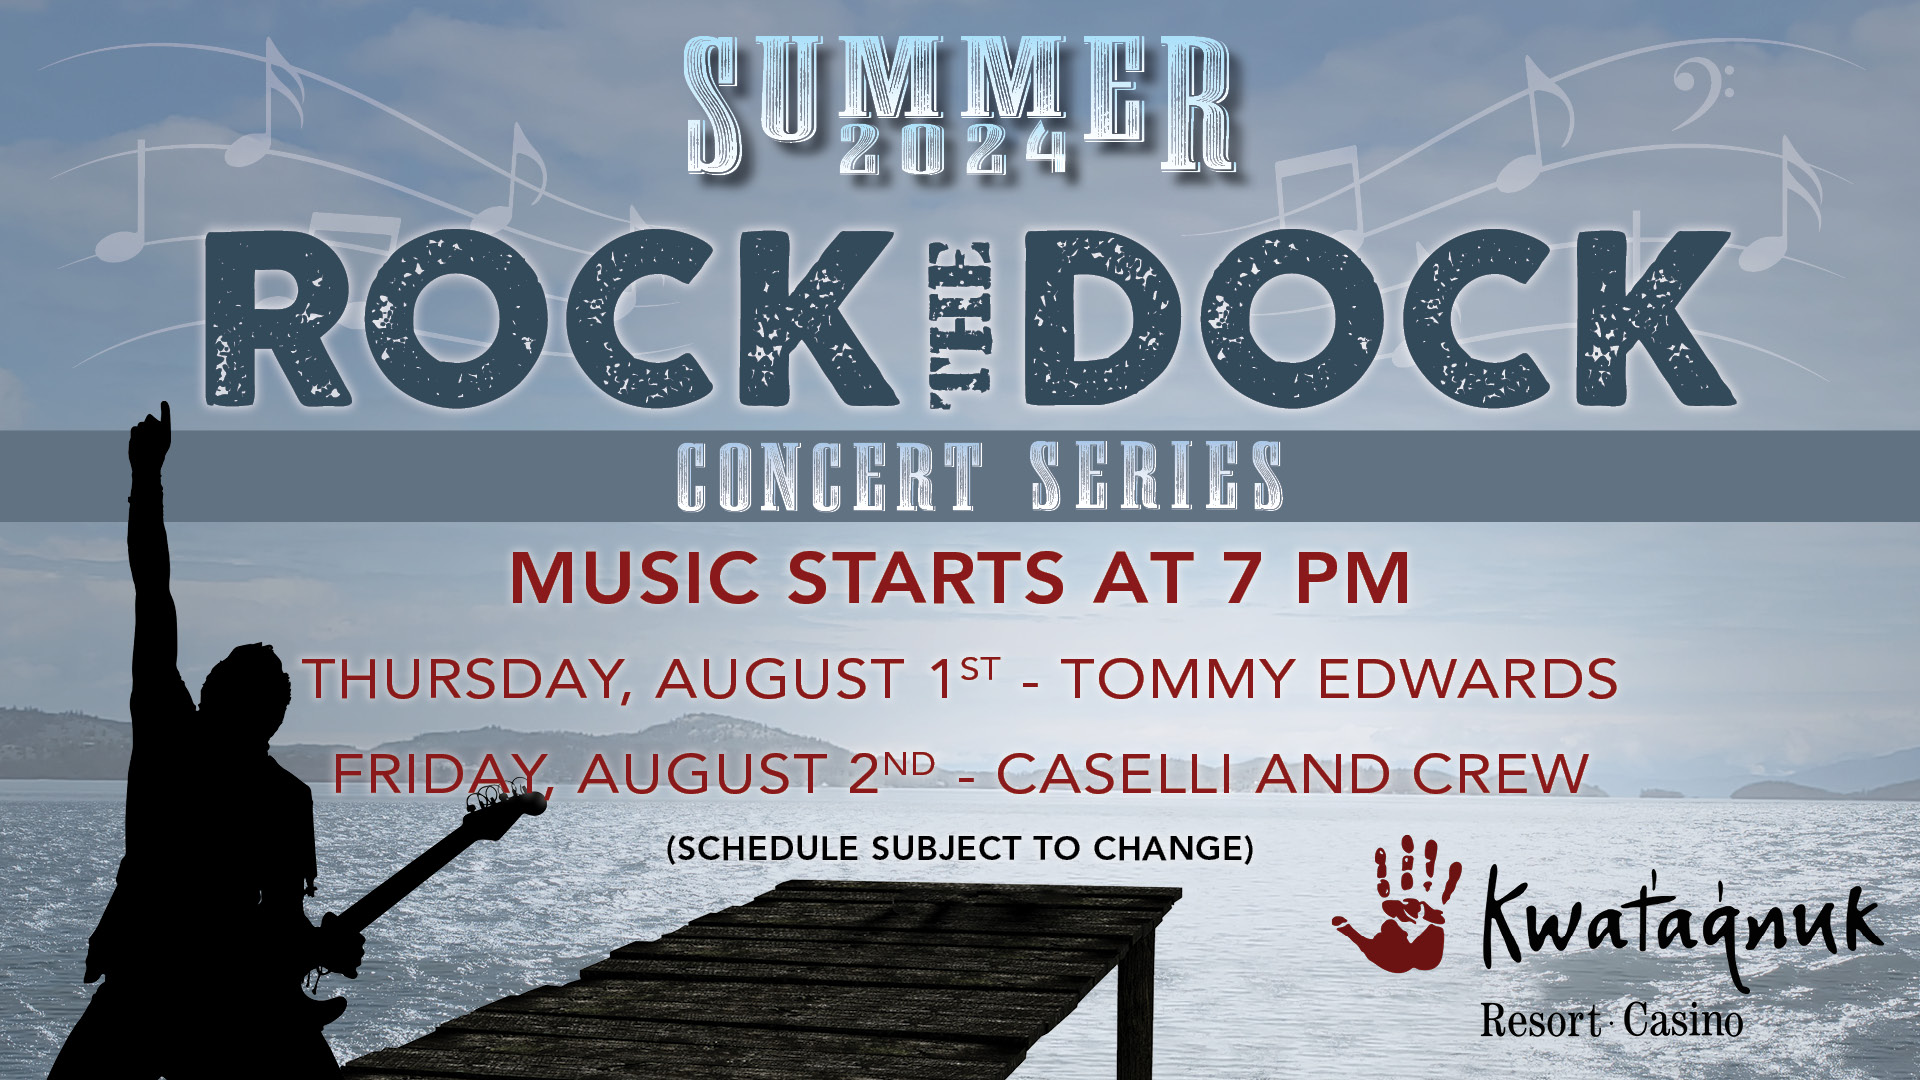 Rock the Dock, Kwataqnuk, Summer Concert Series, Summer Concert, Live music, free event, local event, free local event, Tommy Edwards, Caselli and Crew, Rockin the dock rock the docks,